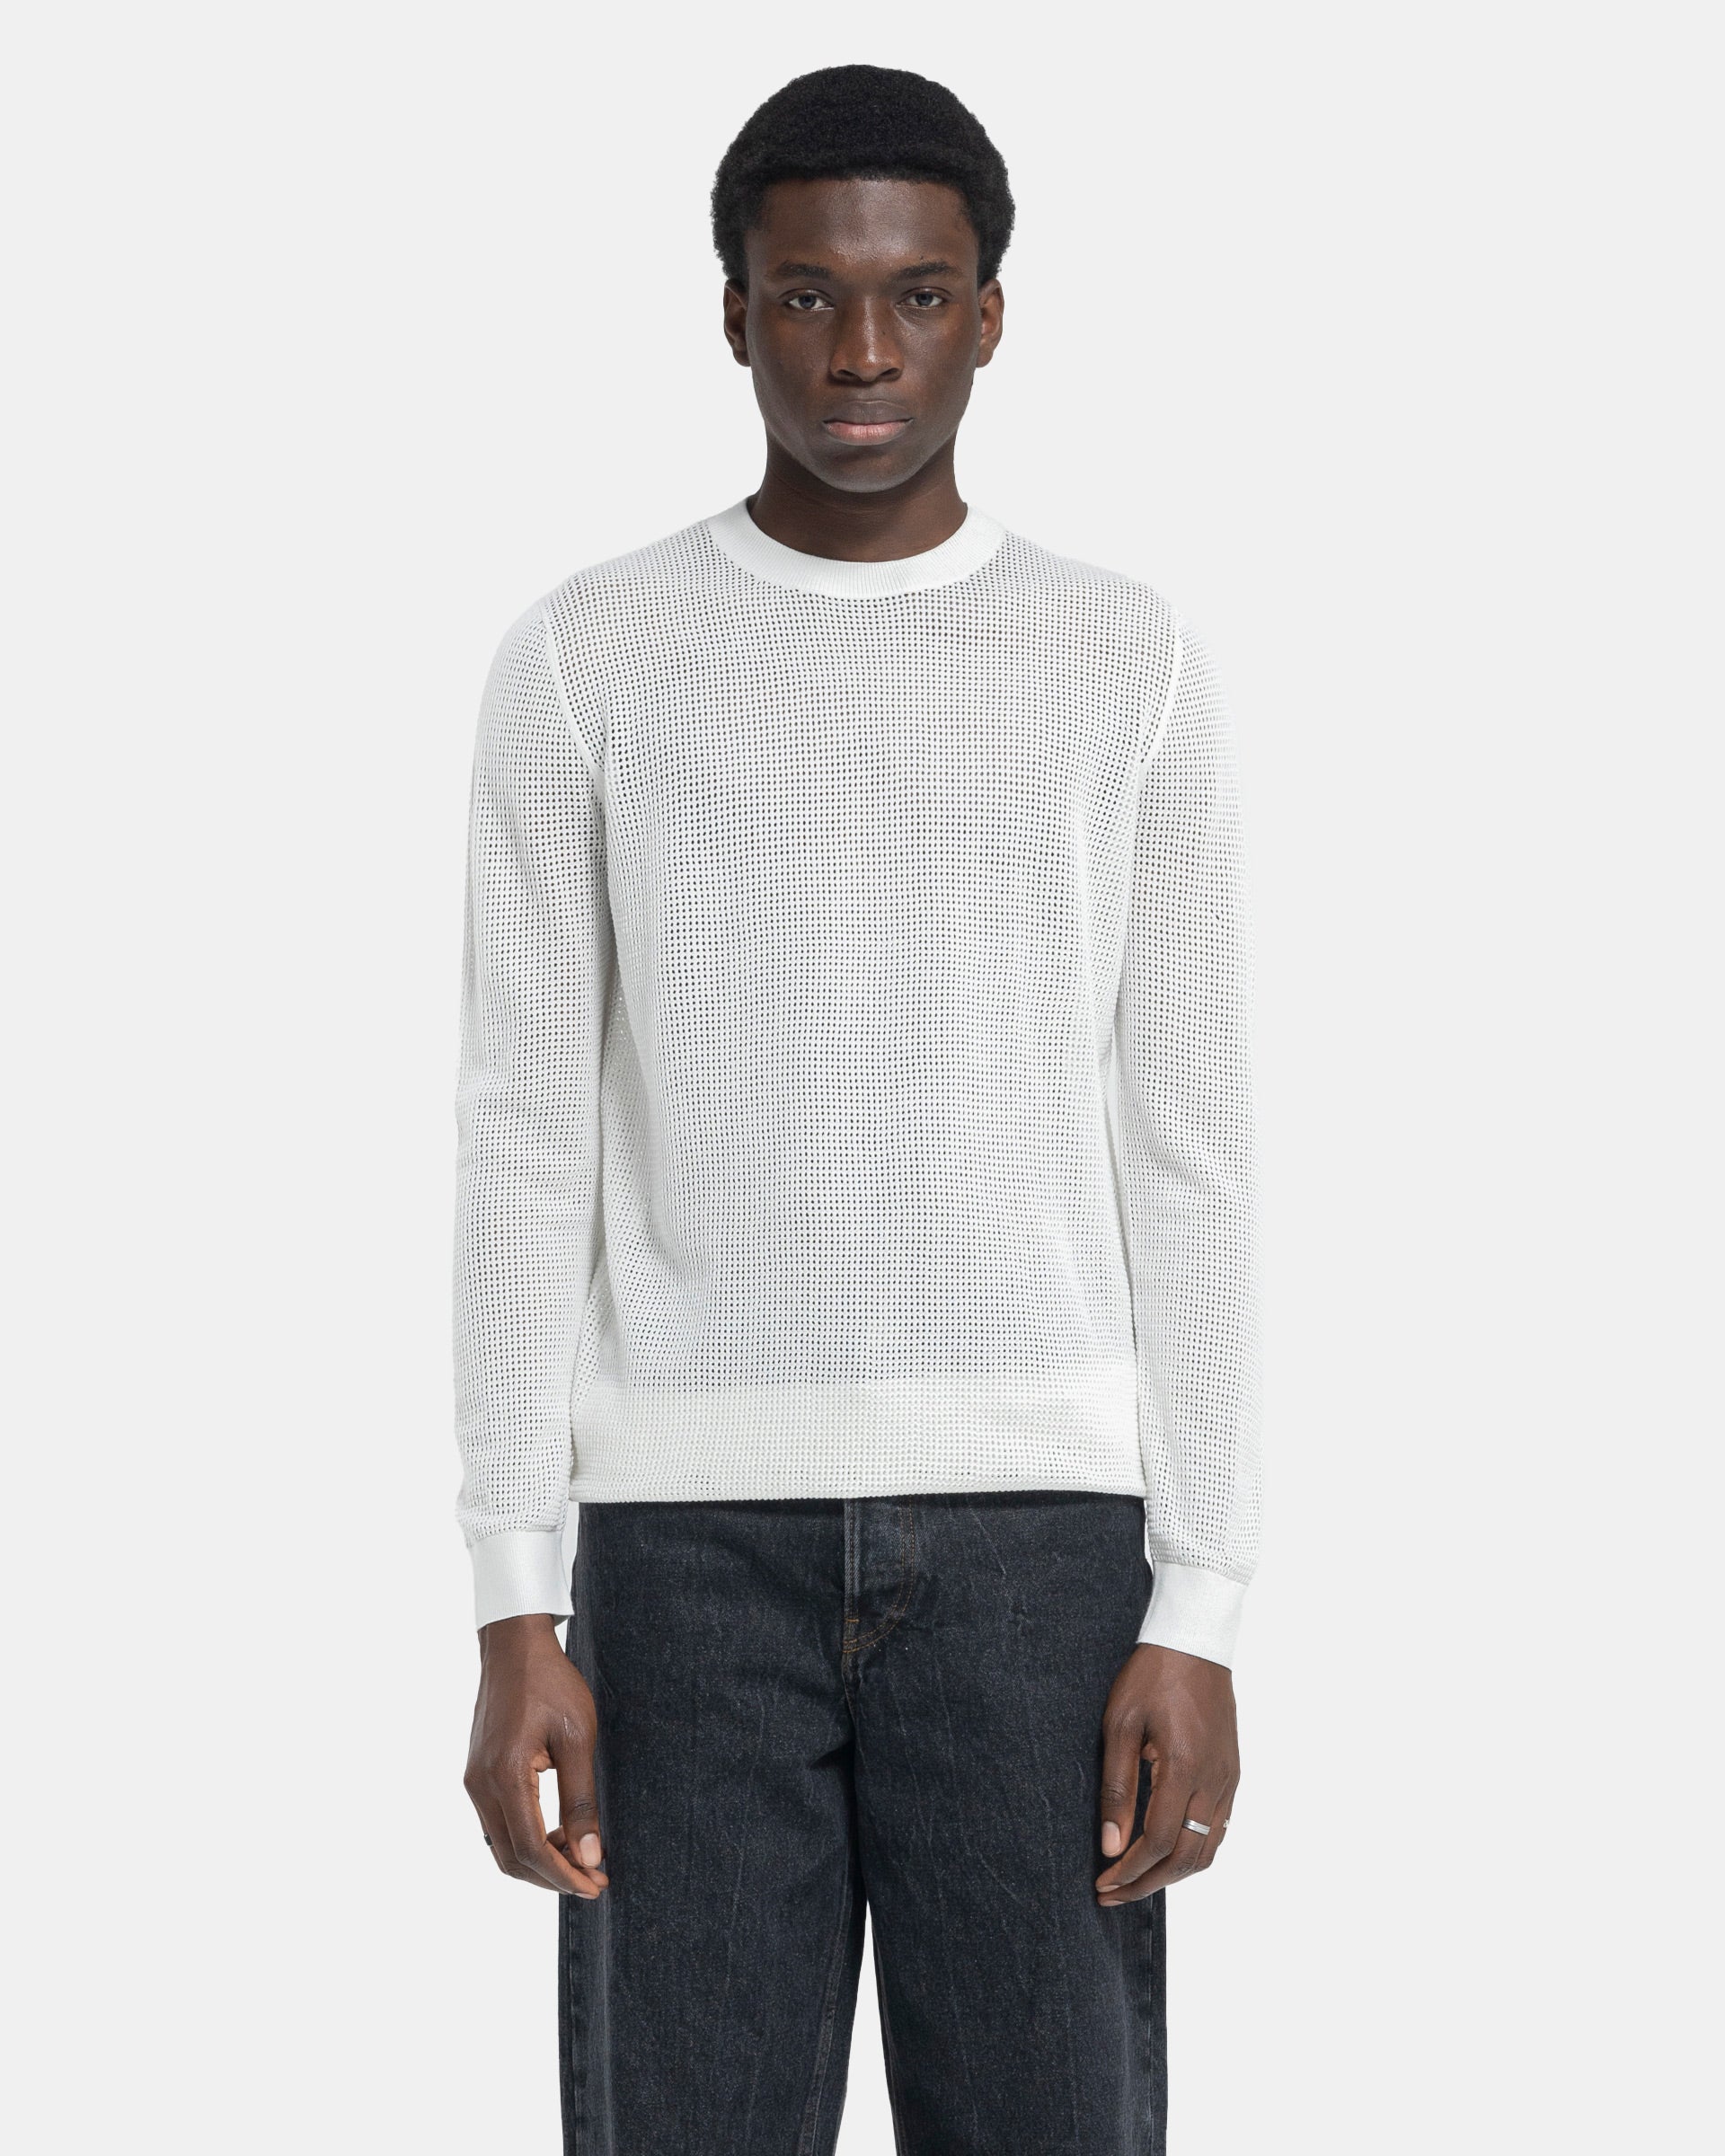 Model wearing Dries Van Noten Mixed Sweater in White on a white background